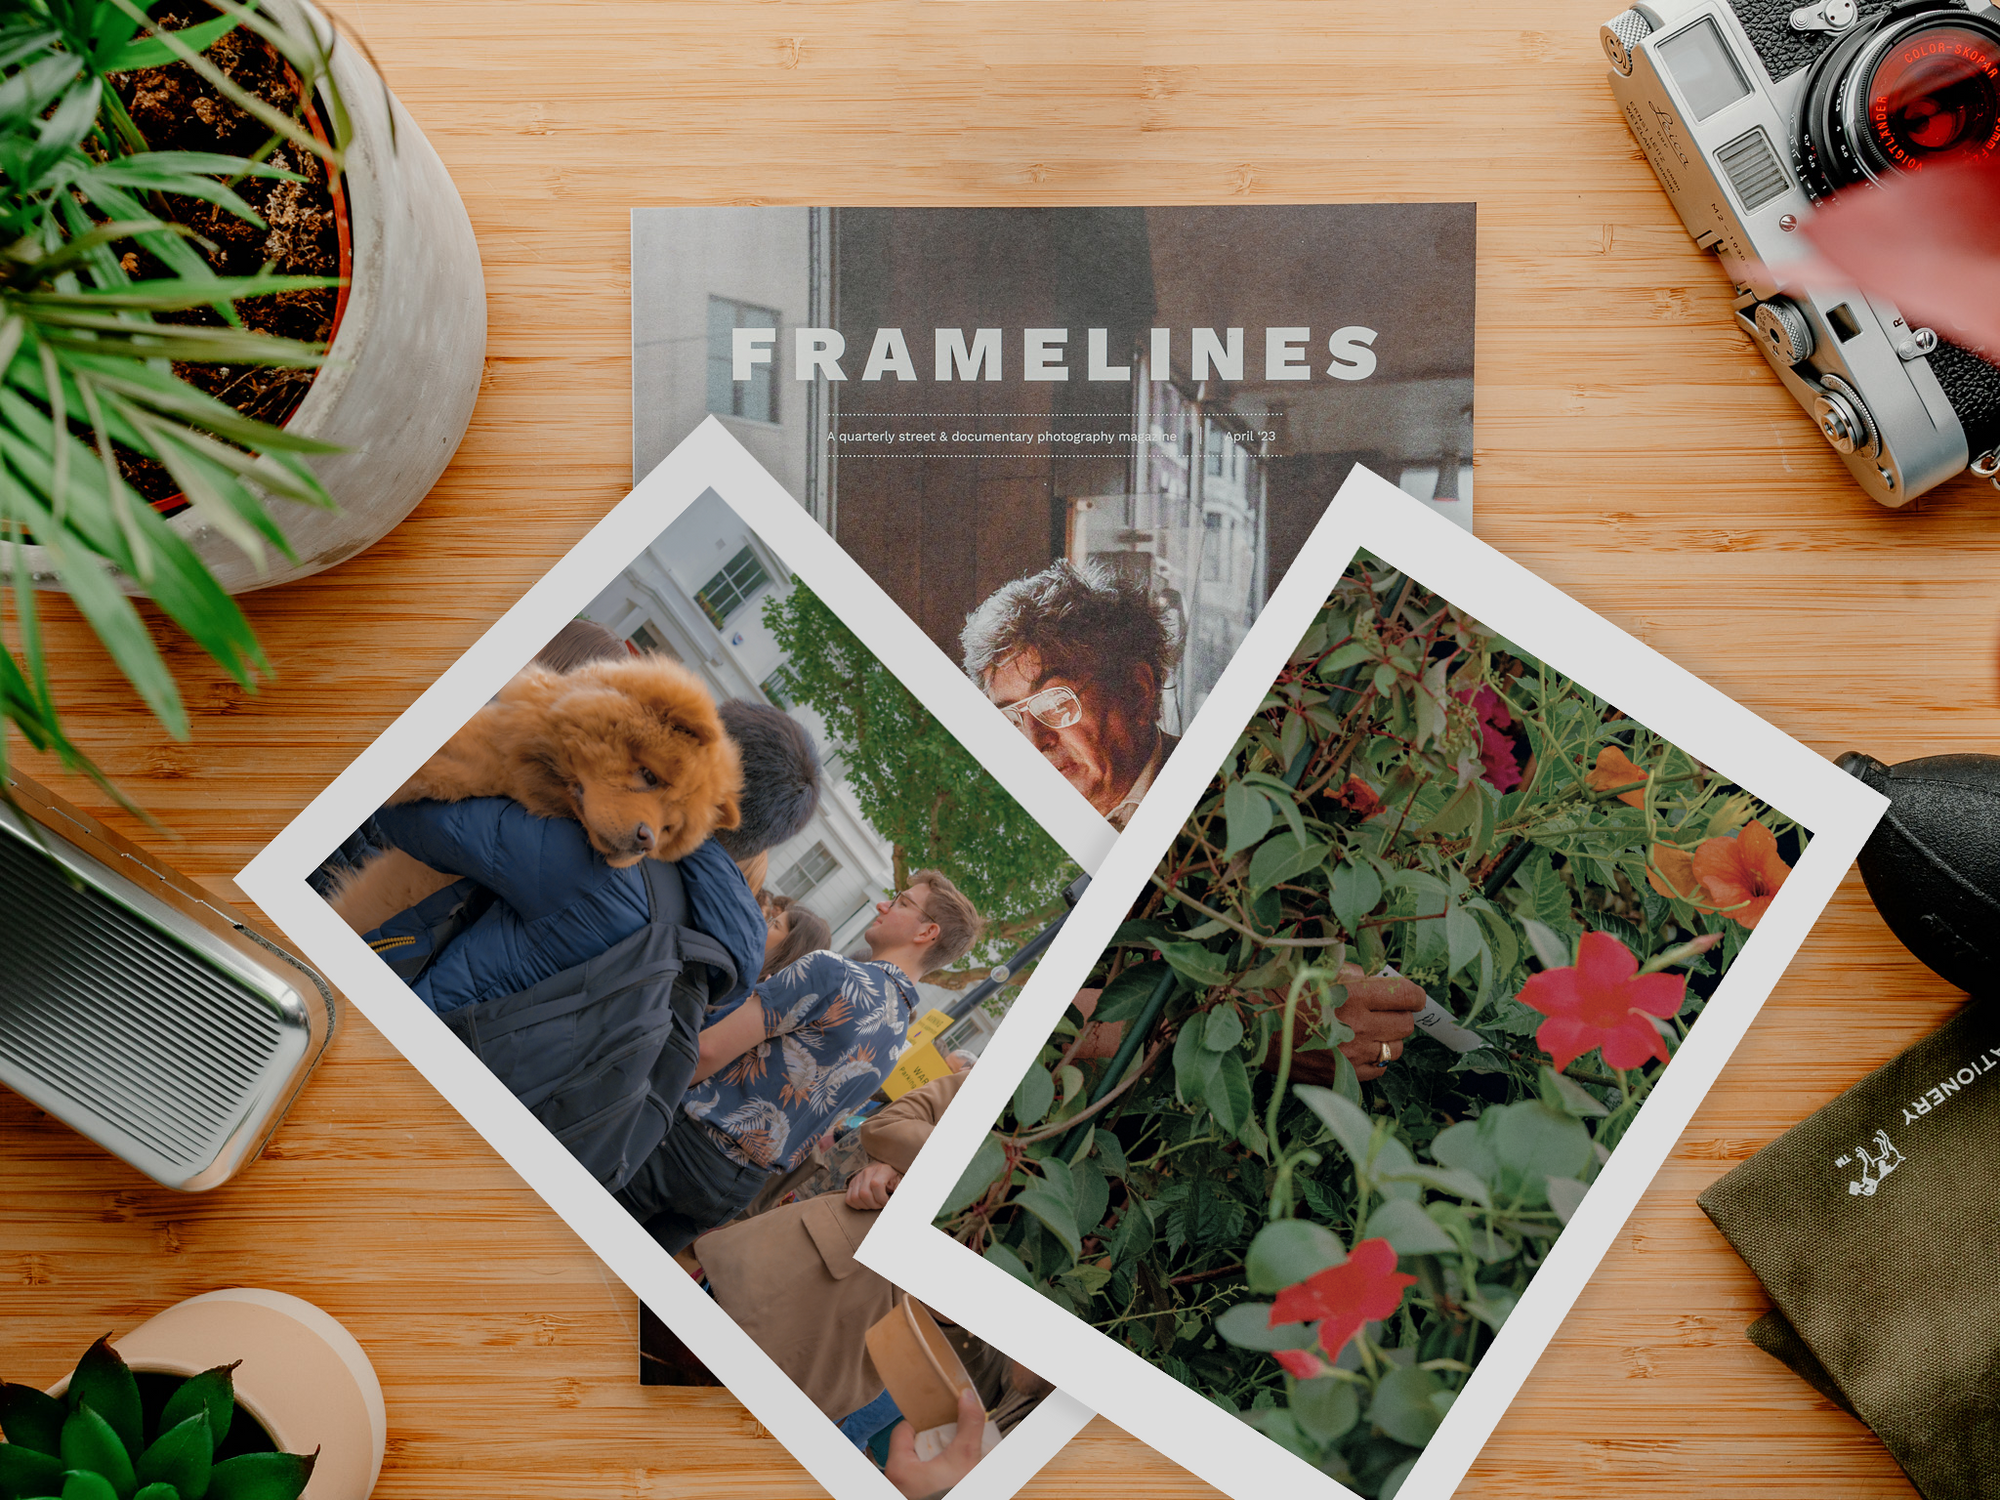 Framelines Magazine Issue 05 (with 2 Prints)